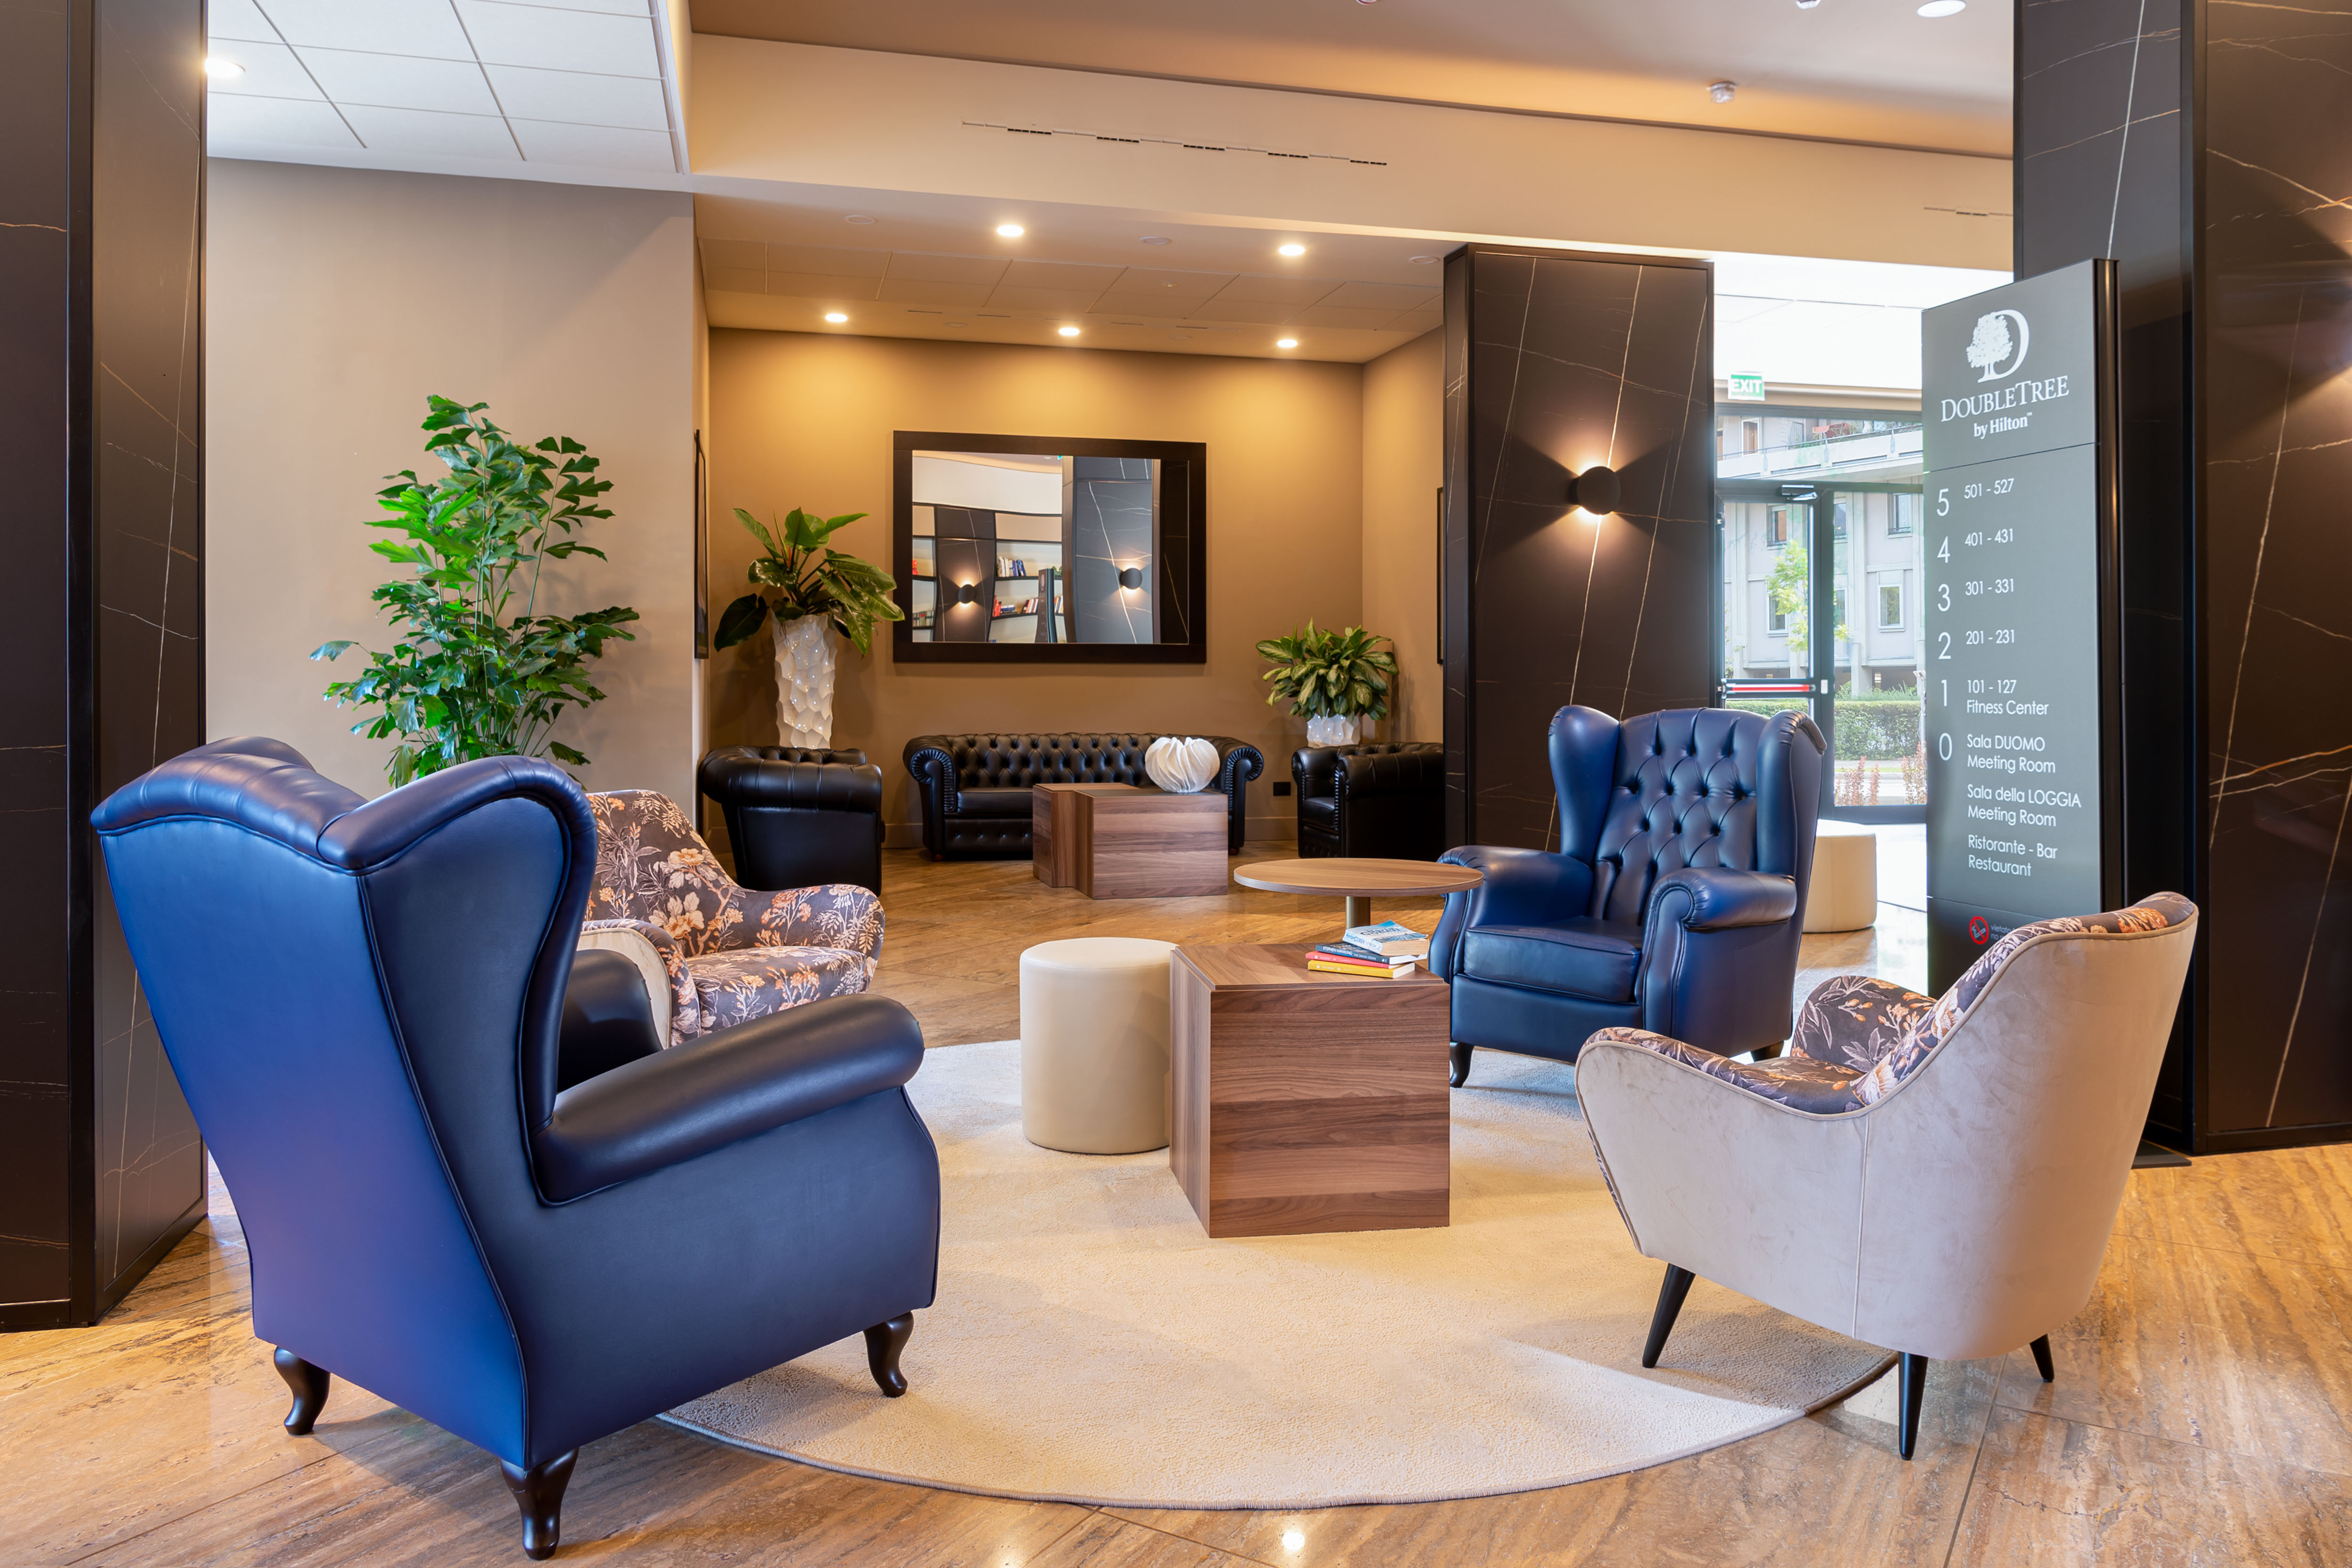 Lobby area with comfortable seating